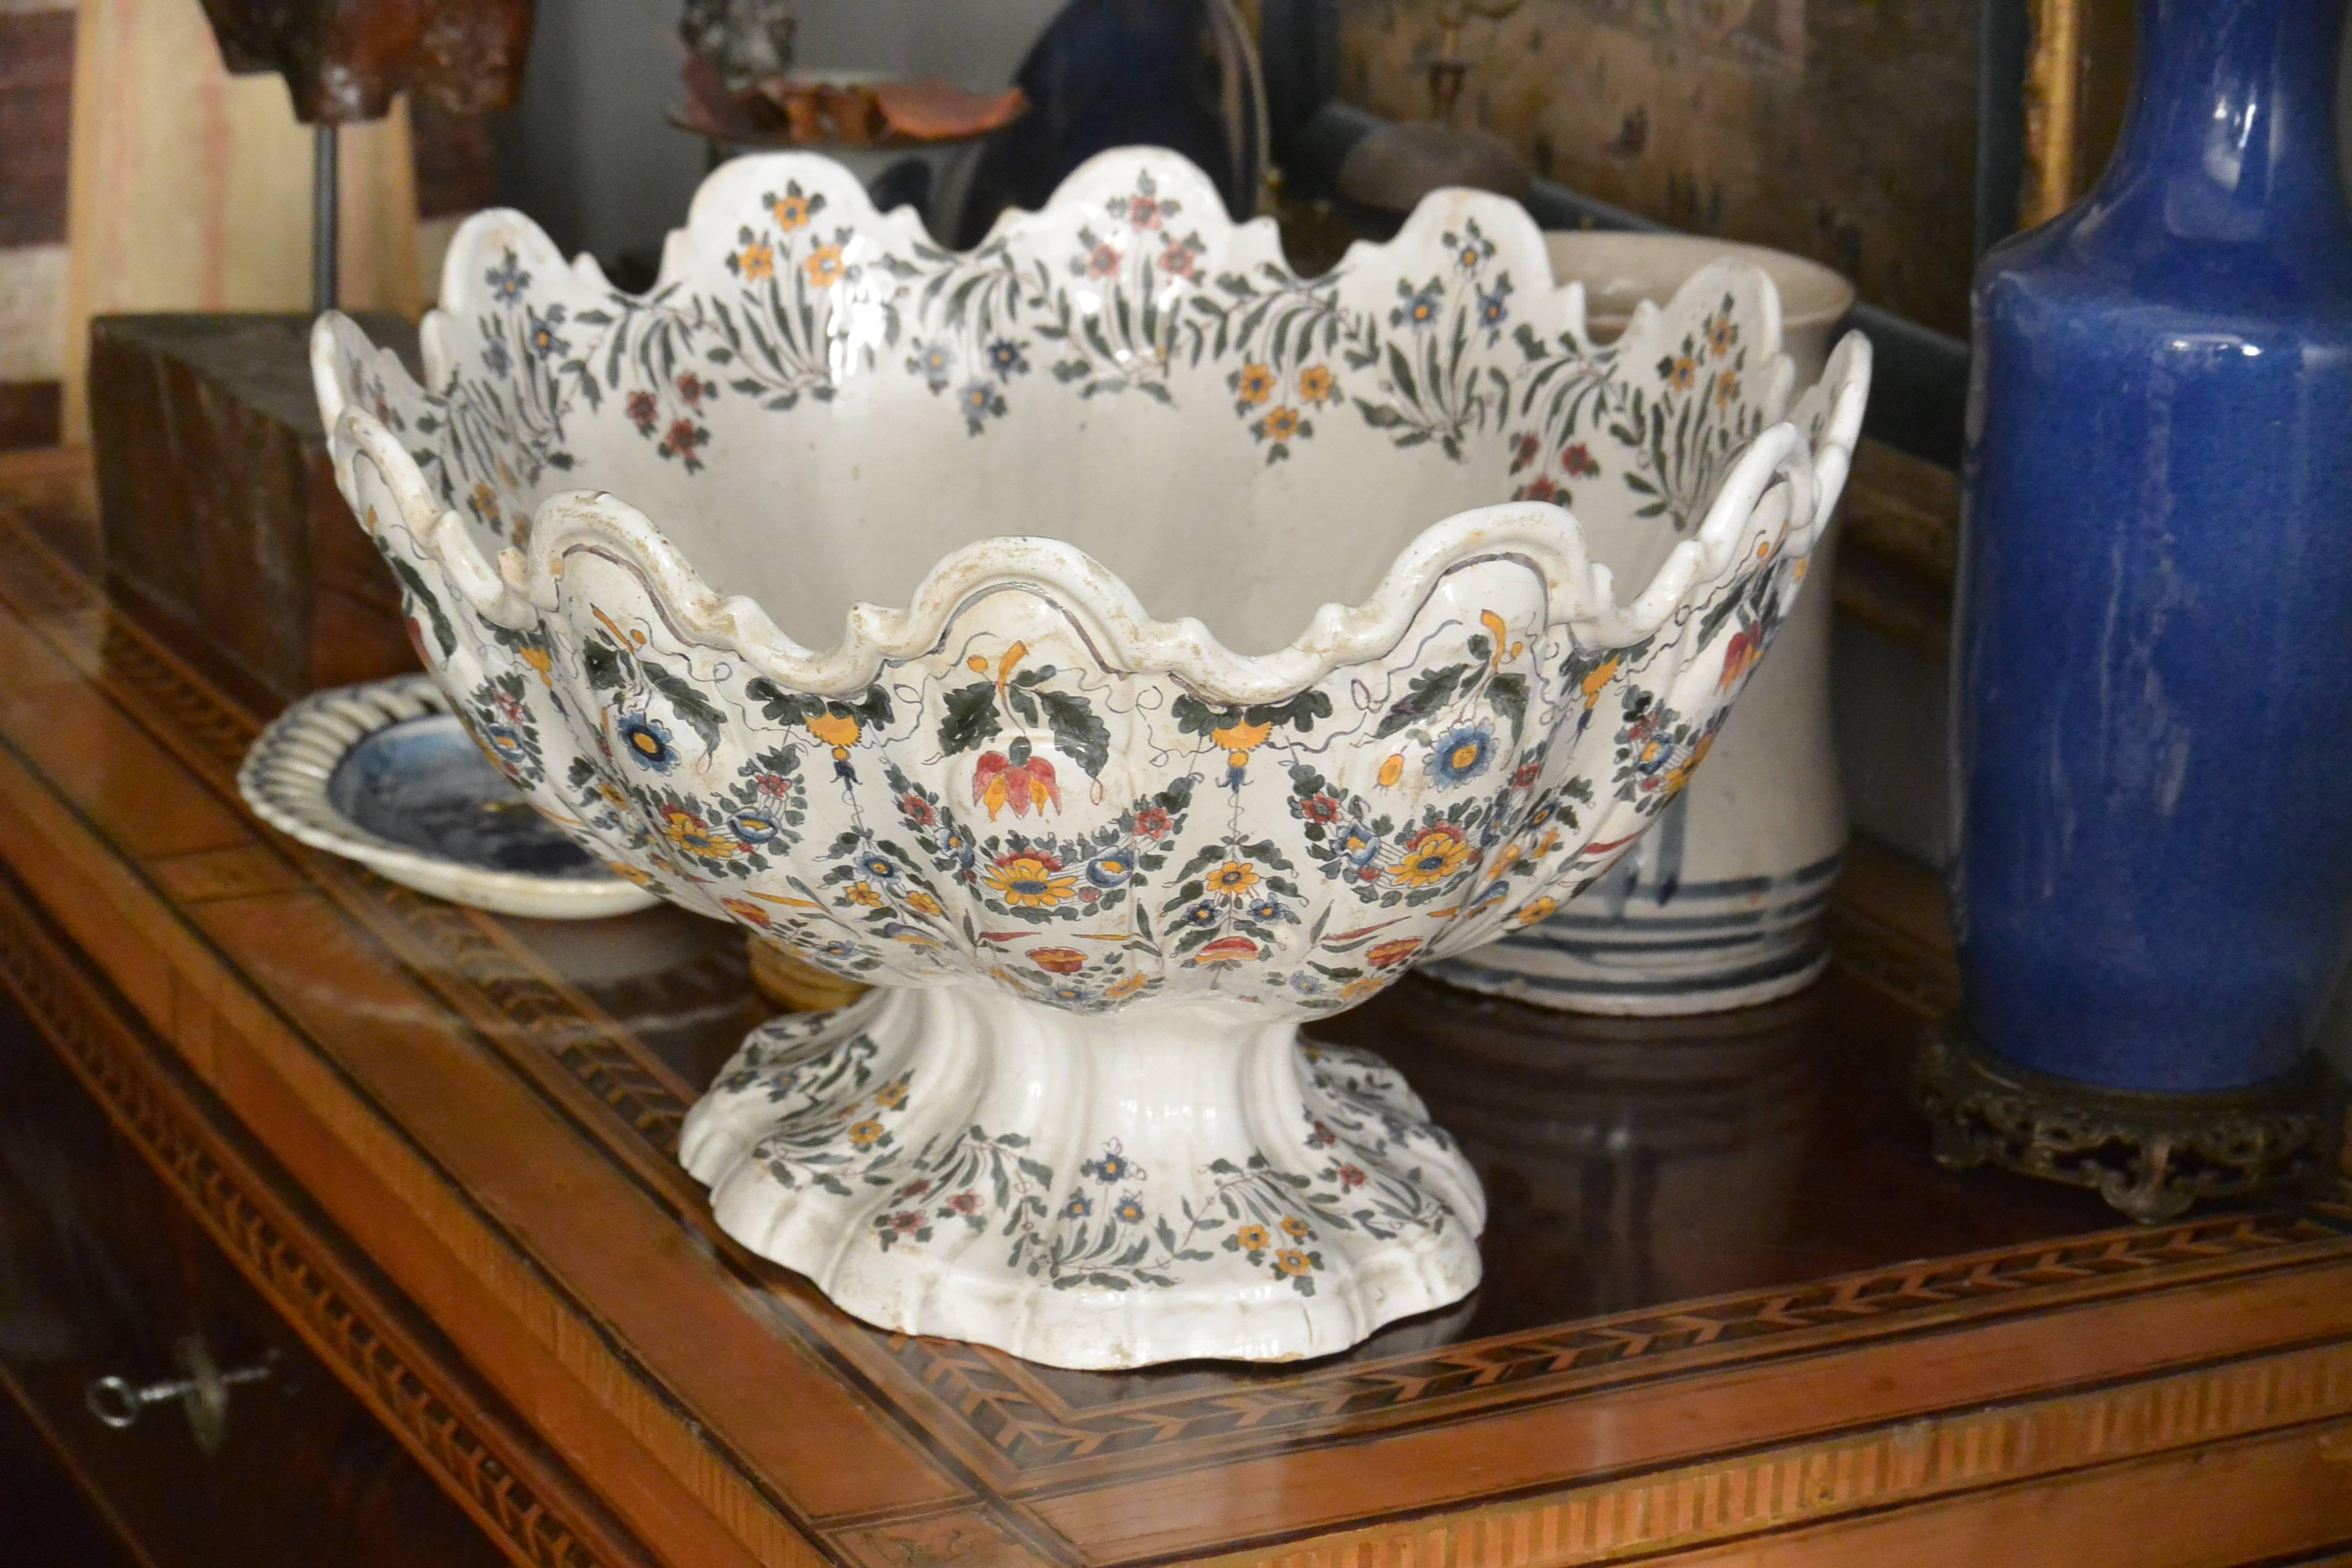 Very large Bassano centerpiece bowl of footed monteith form. Decorative floral sprays and swags throughout the twelve lobes and footed base as well as large bouquet on interior. Underglaze blue marks for Bassano. Italy, circa 1840.
Dimensions: 18